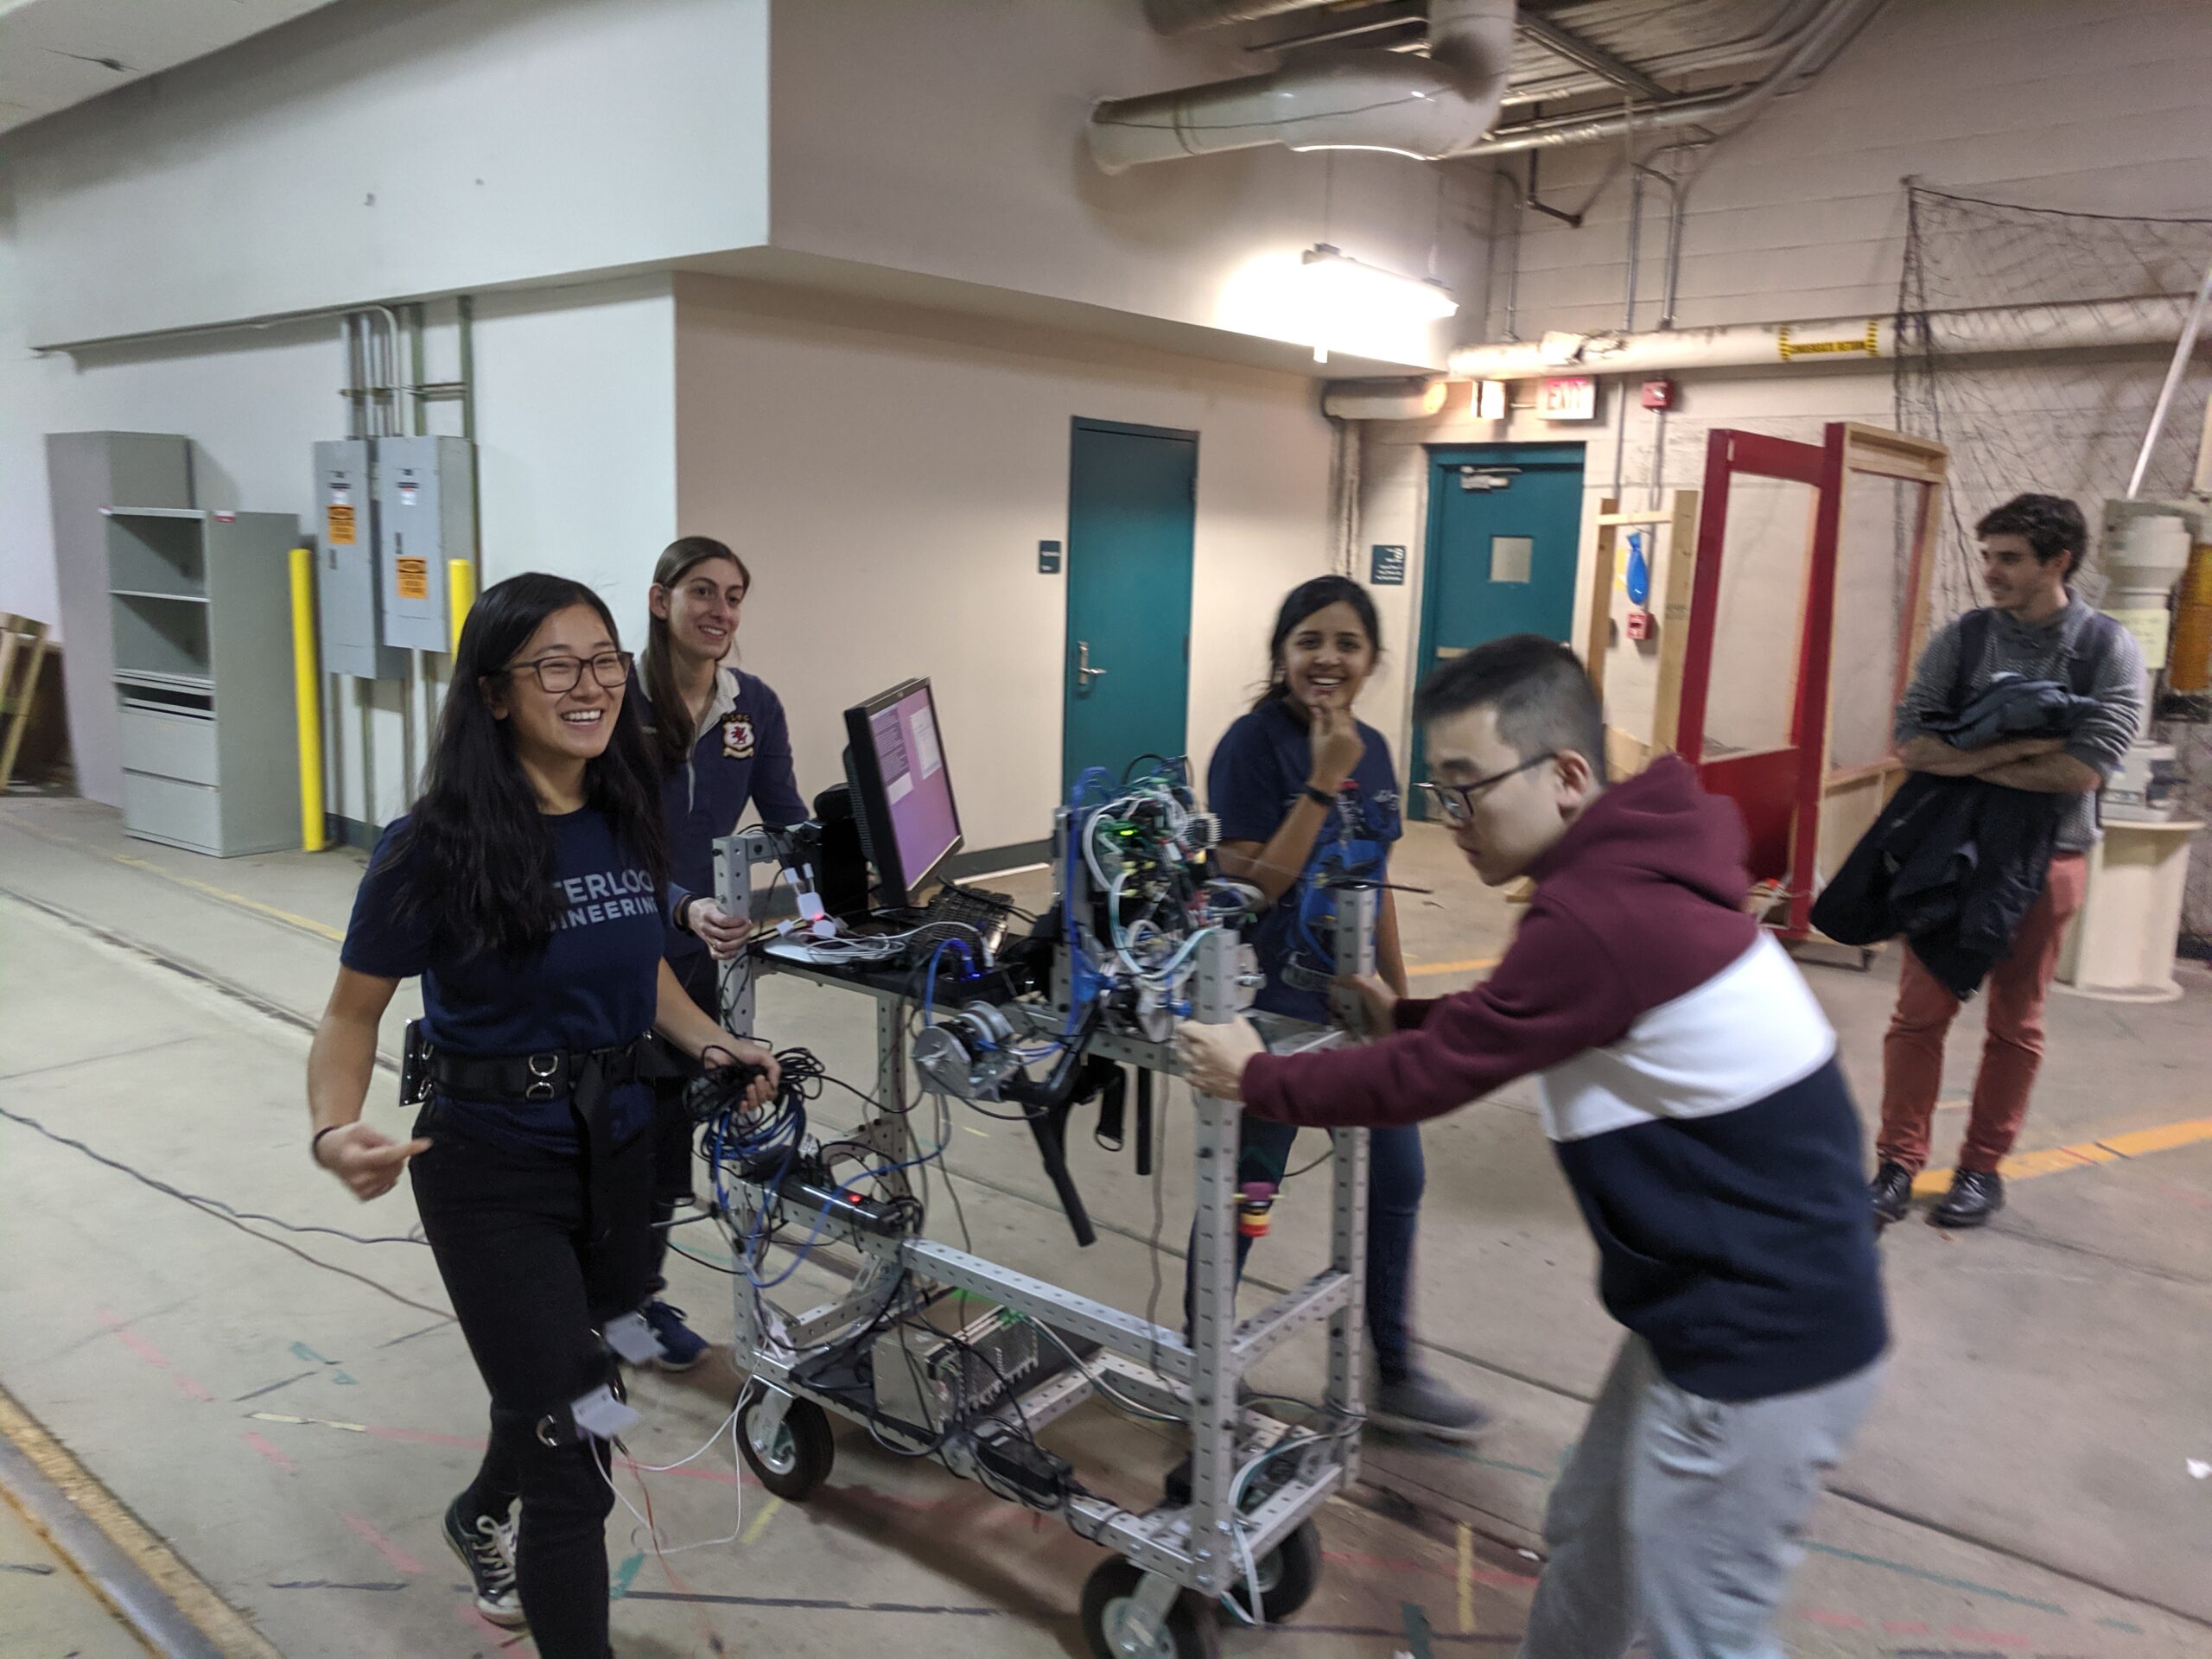 Exoskeleton anyone? One of the most impressive team, Team Soteria: From right: Boshen Niu, Rupika Nilakant, Aubrey Kalashian and Angela Chao. Sachin was also in this group. On the background, our own and only Jorge.